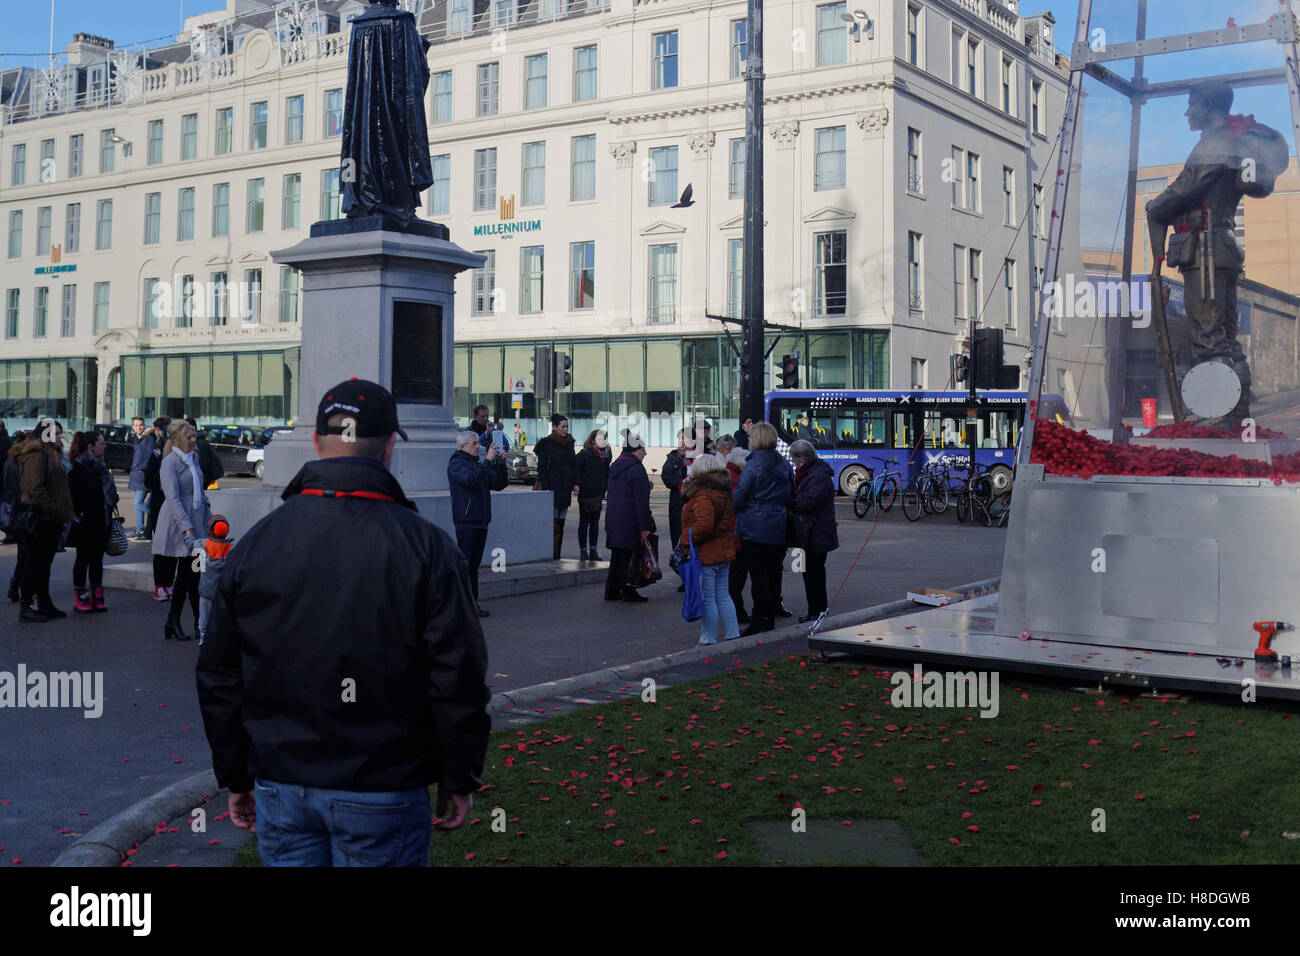 Glasgow, Scotland, UK 10th November 2016 George Square Glasgow has its Garden of remembrance and poppy statue for people to pay respects Credit:  Gerard Ferry/Alamy Live News Stock Photo